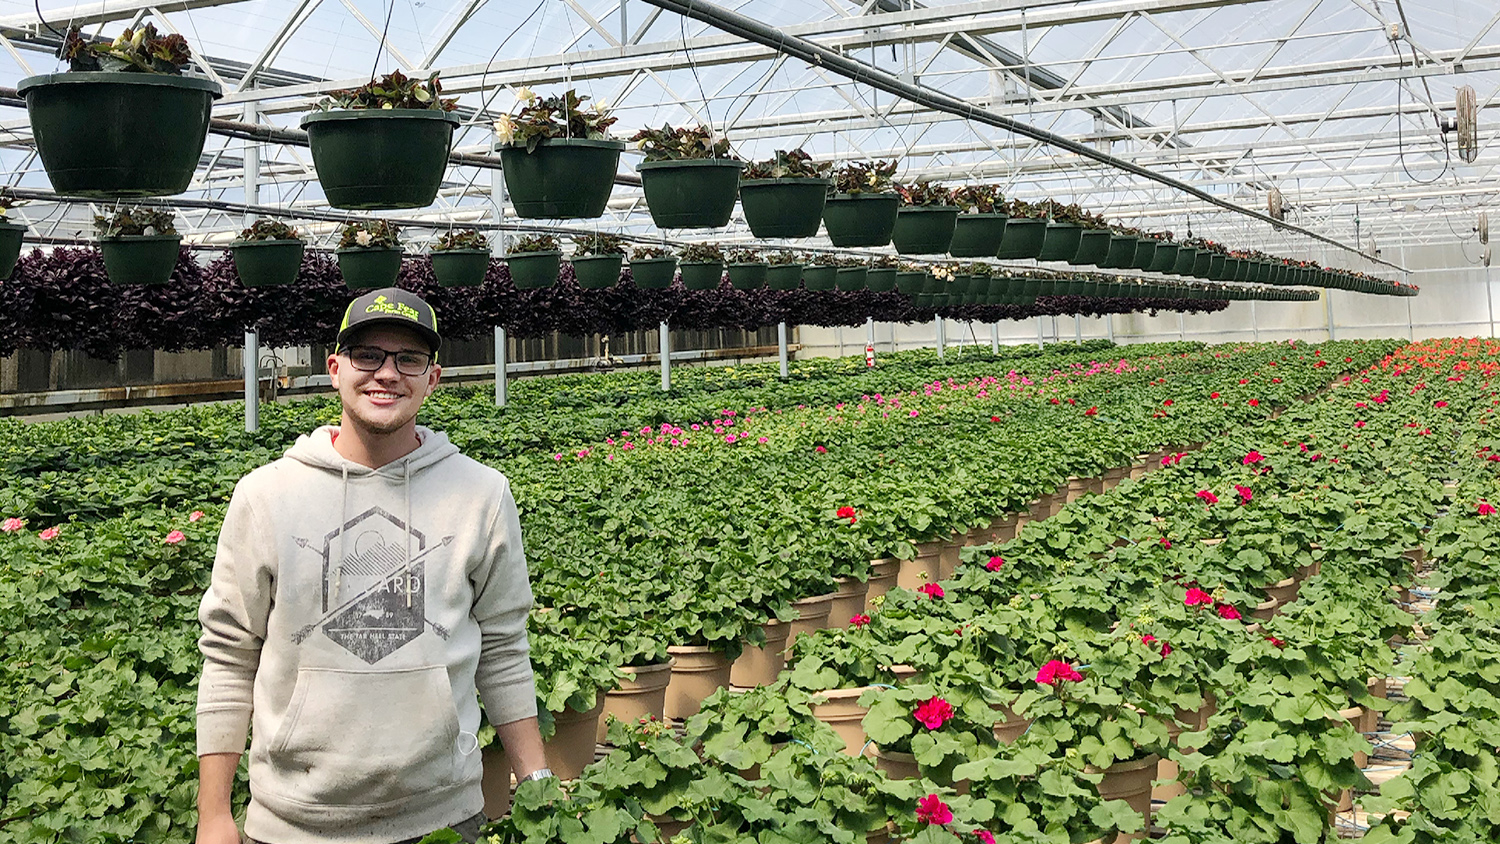 a man stands in a greenhouse among rows of plants